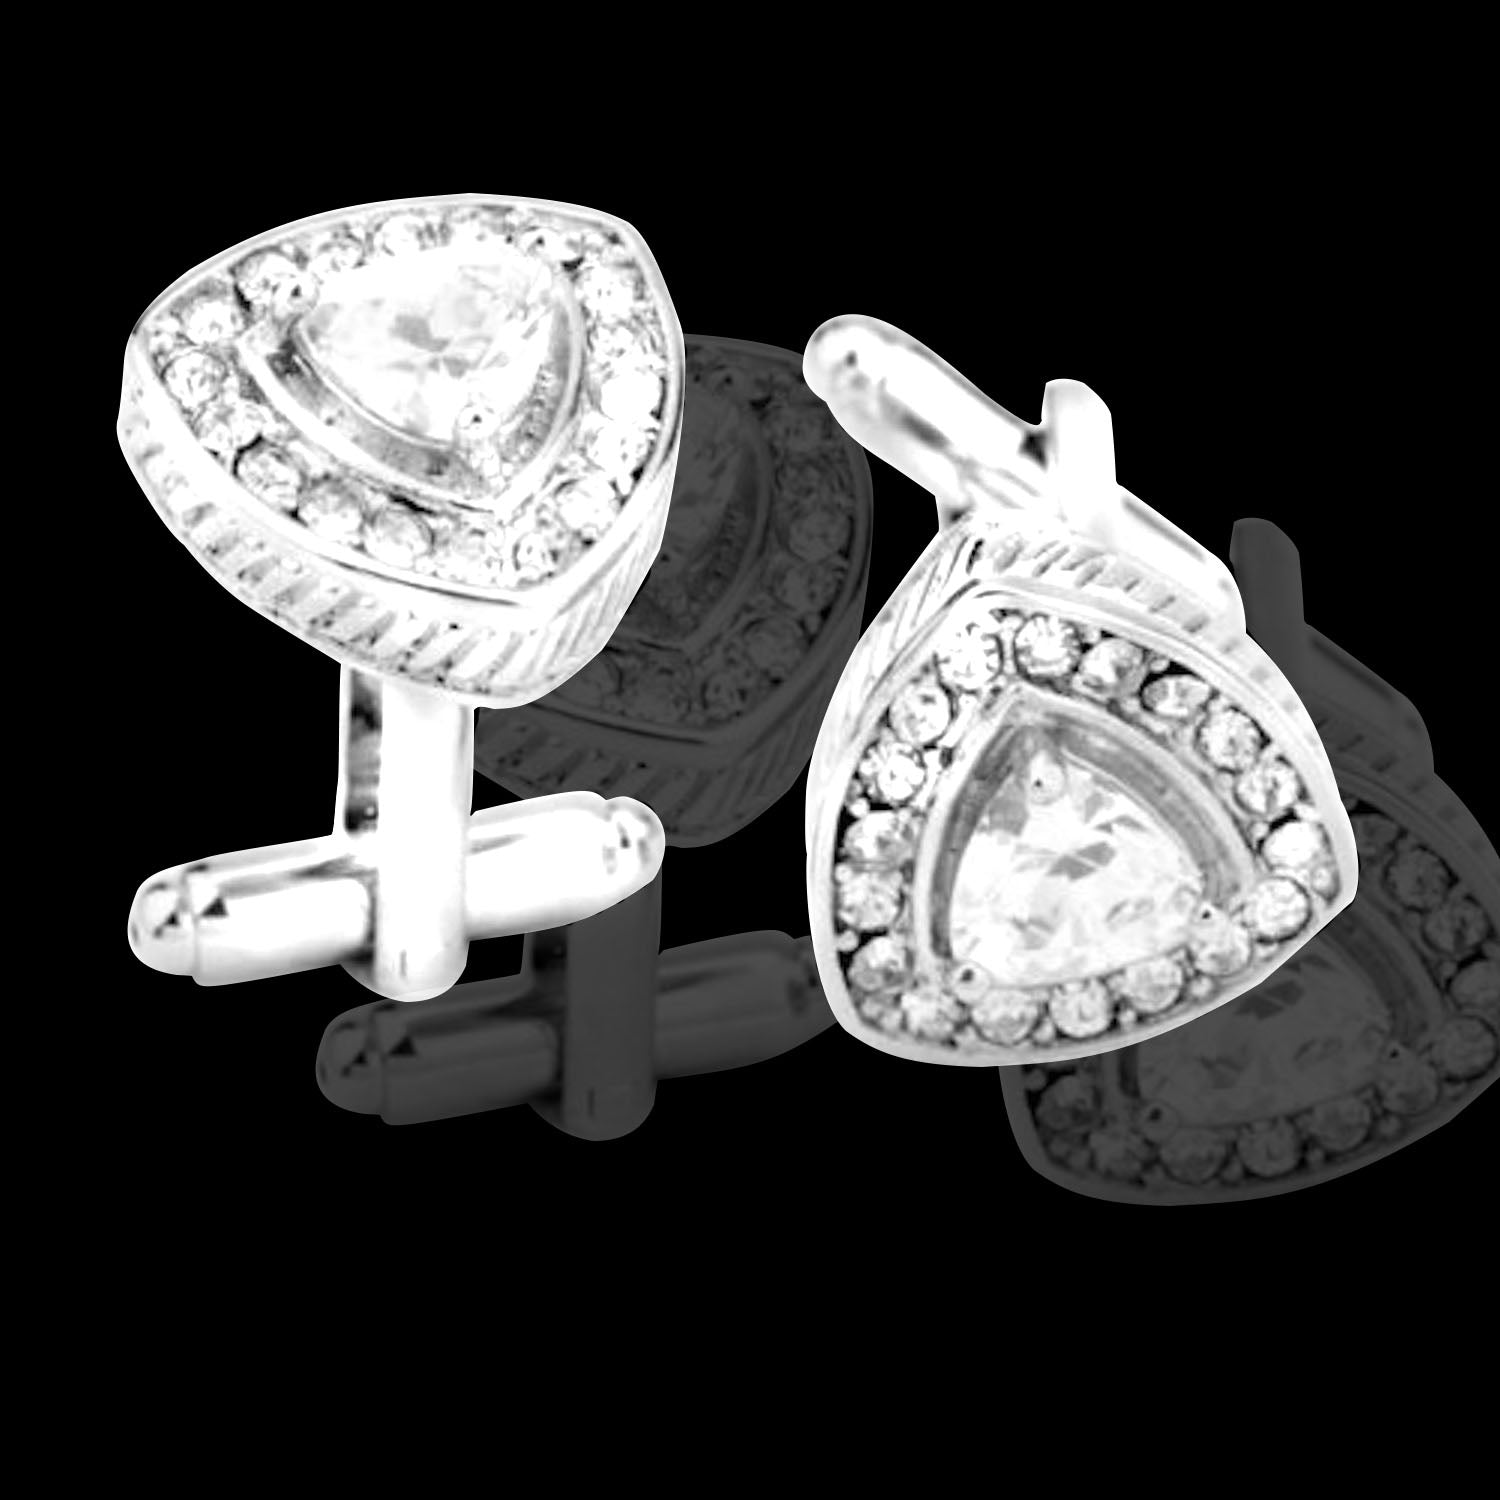 White with White Triangle Mens Stainless Steel Diamond Cufflinks for